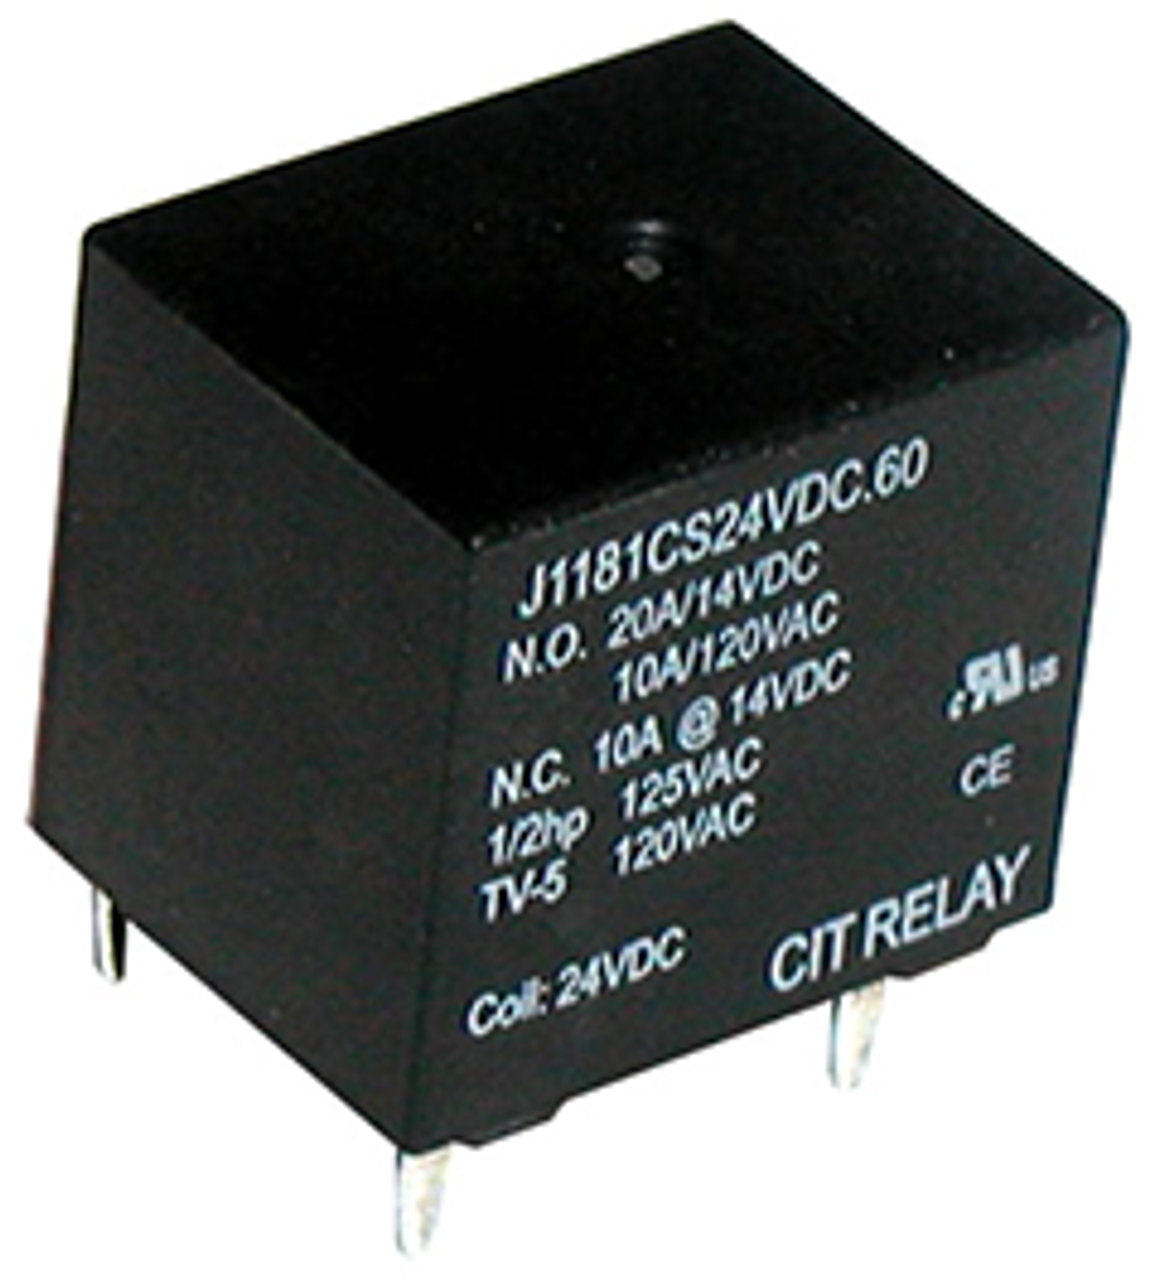 CIT Relay and Switch J1181AS24VDC.80 Power Relays